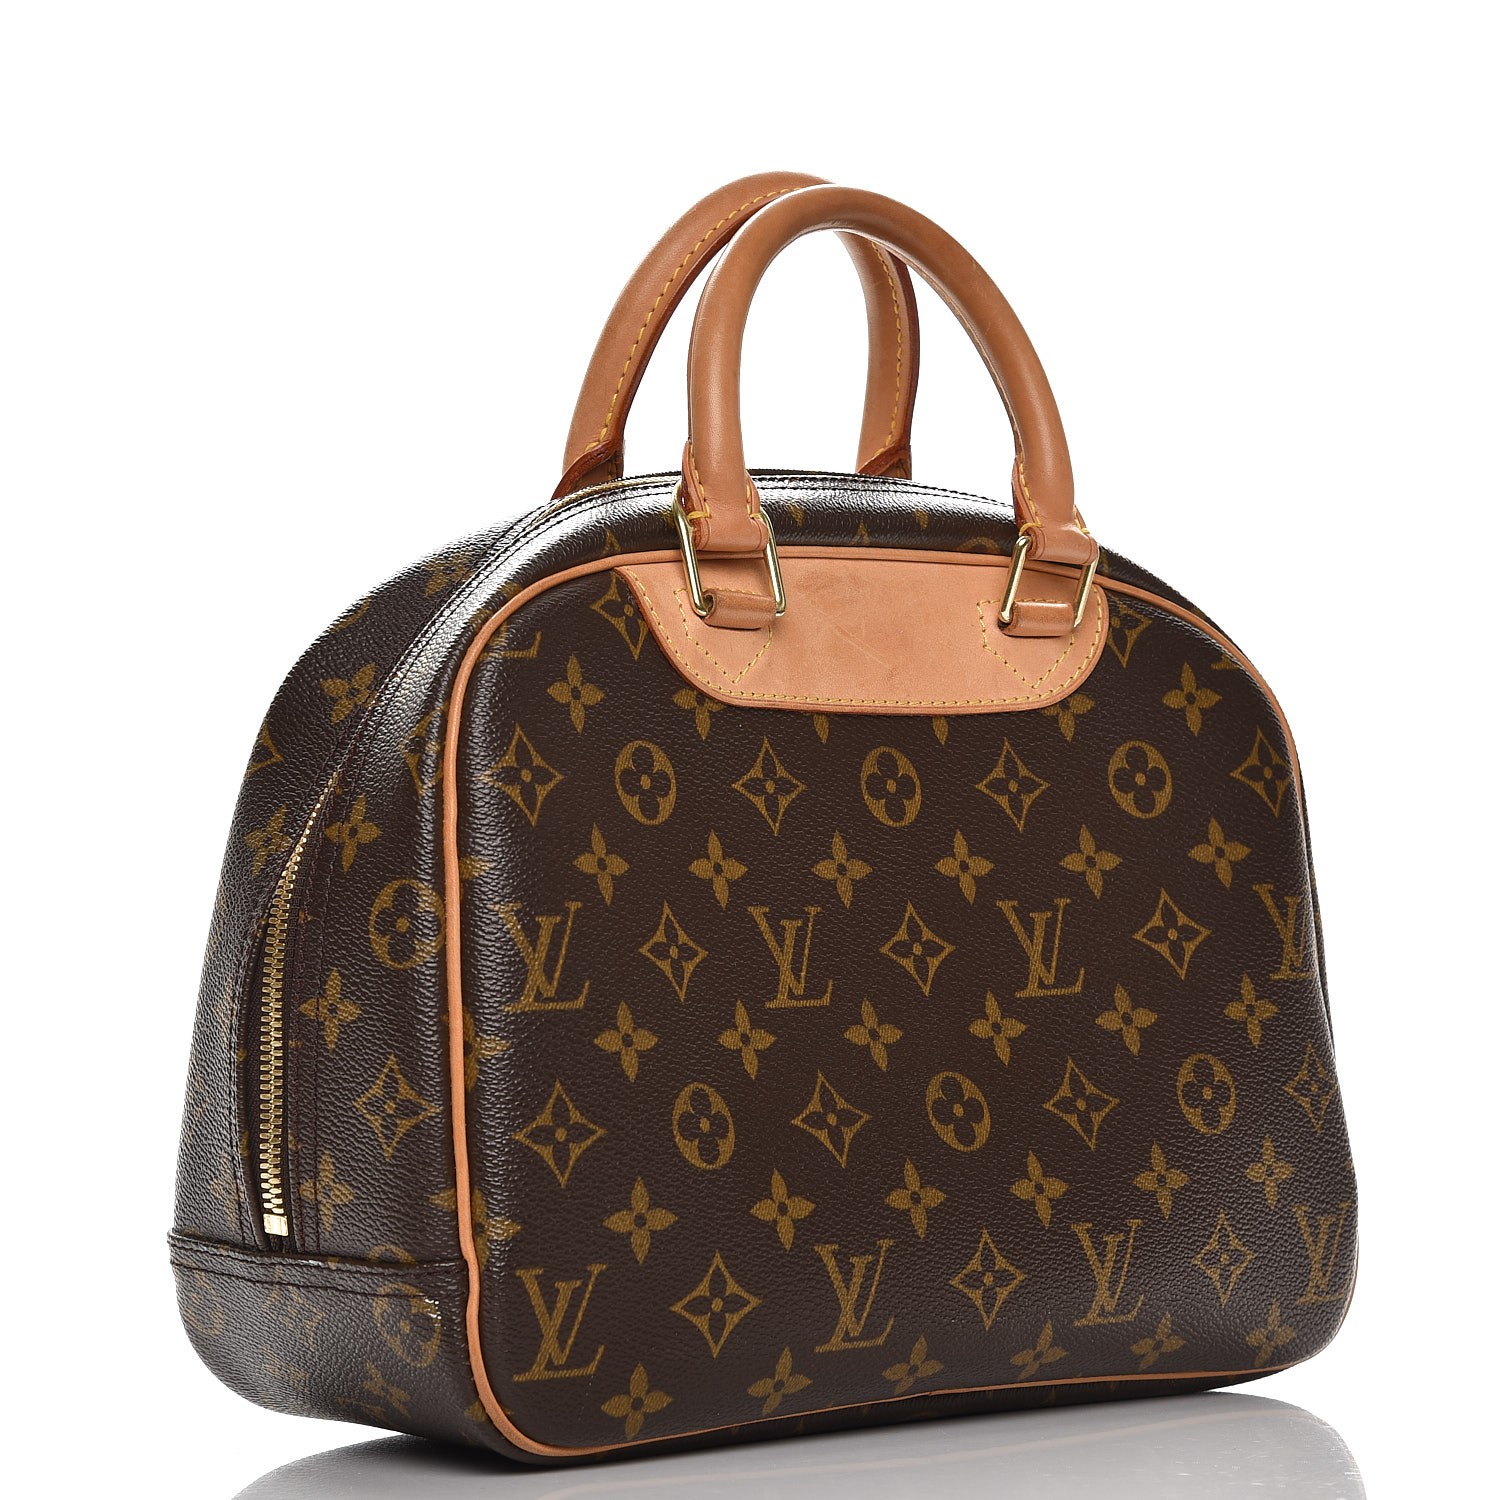 Louis Vuitton Carry-On Bag ''Trolley 45'' Monogram size  H17 x W13 x D7 in